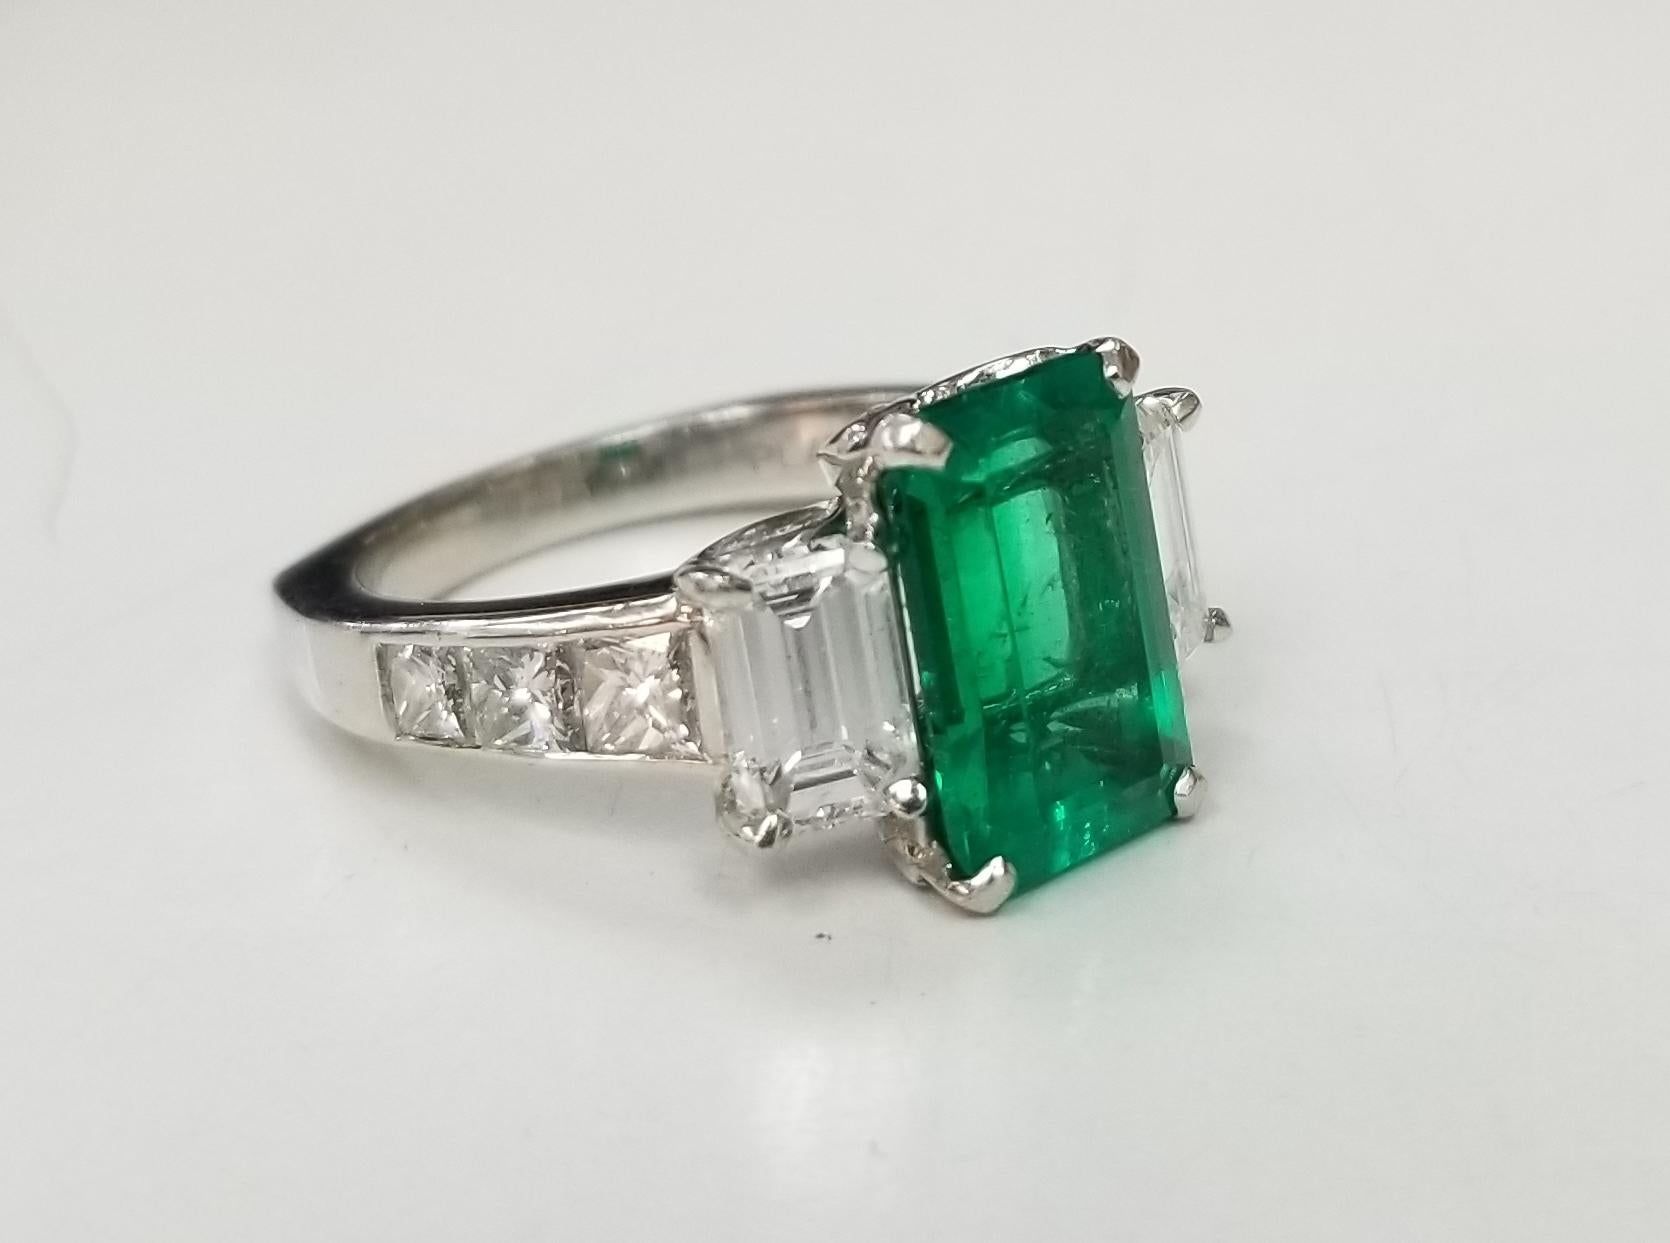 This is a vintage Platinum GIA Certified Colombian emerald and diamond ring. The center stone is 2.92 carat weight with a fine medium color and good clarity. There are 2 emerald cut diamonds weighing 1.46 carat total weight . and 6 princess cut and